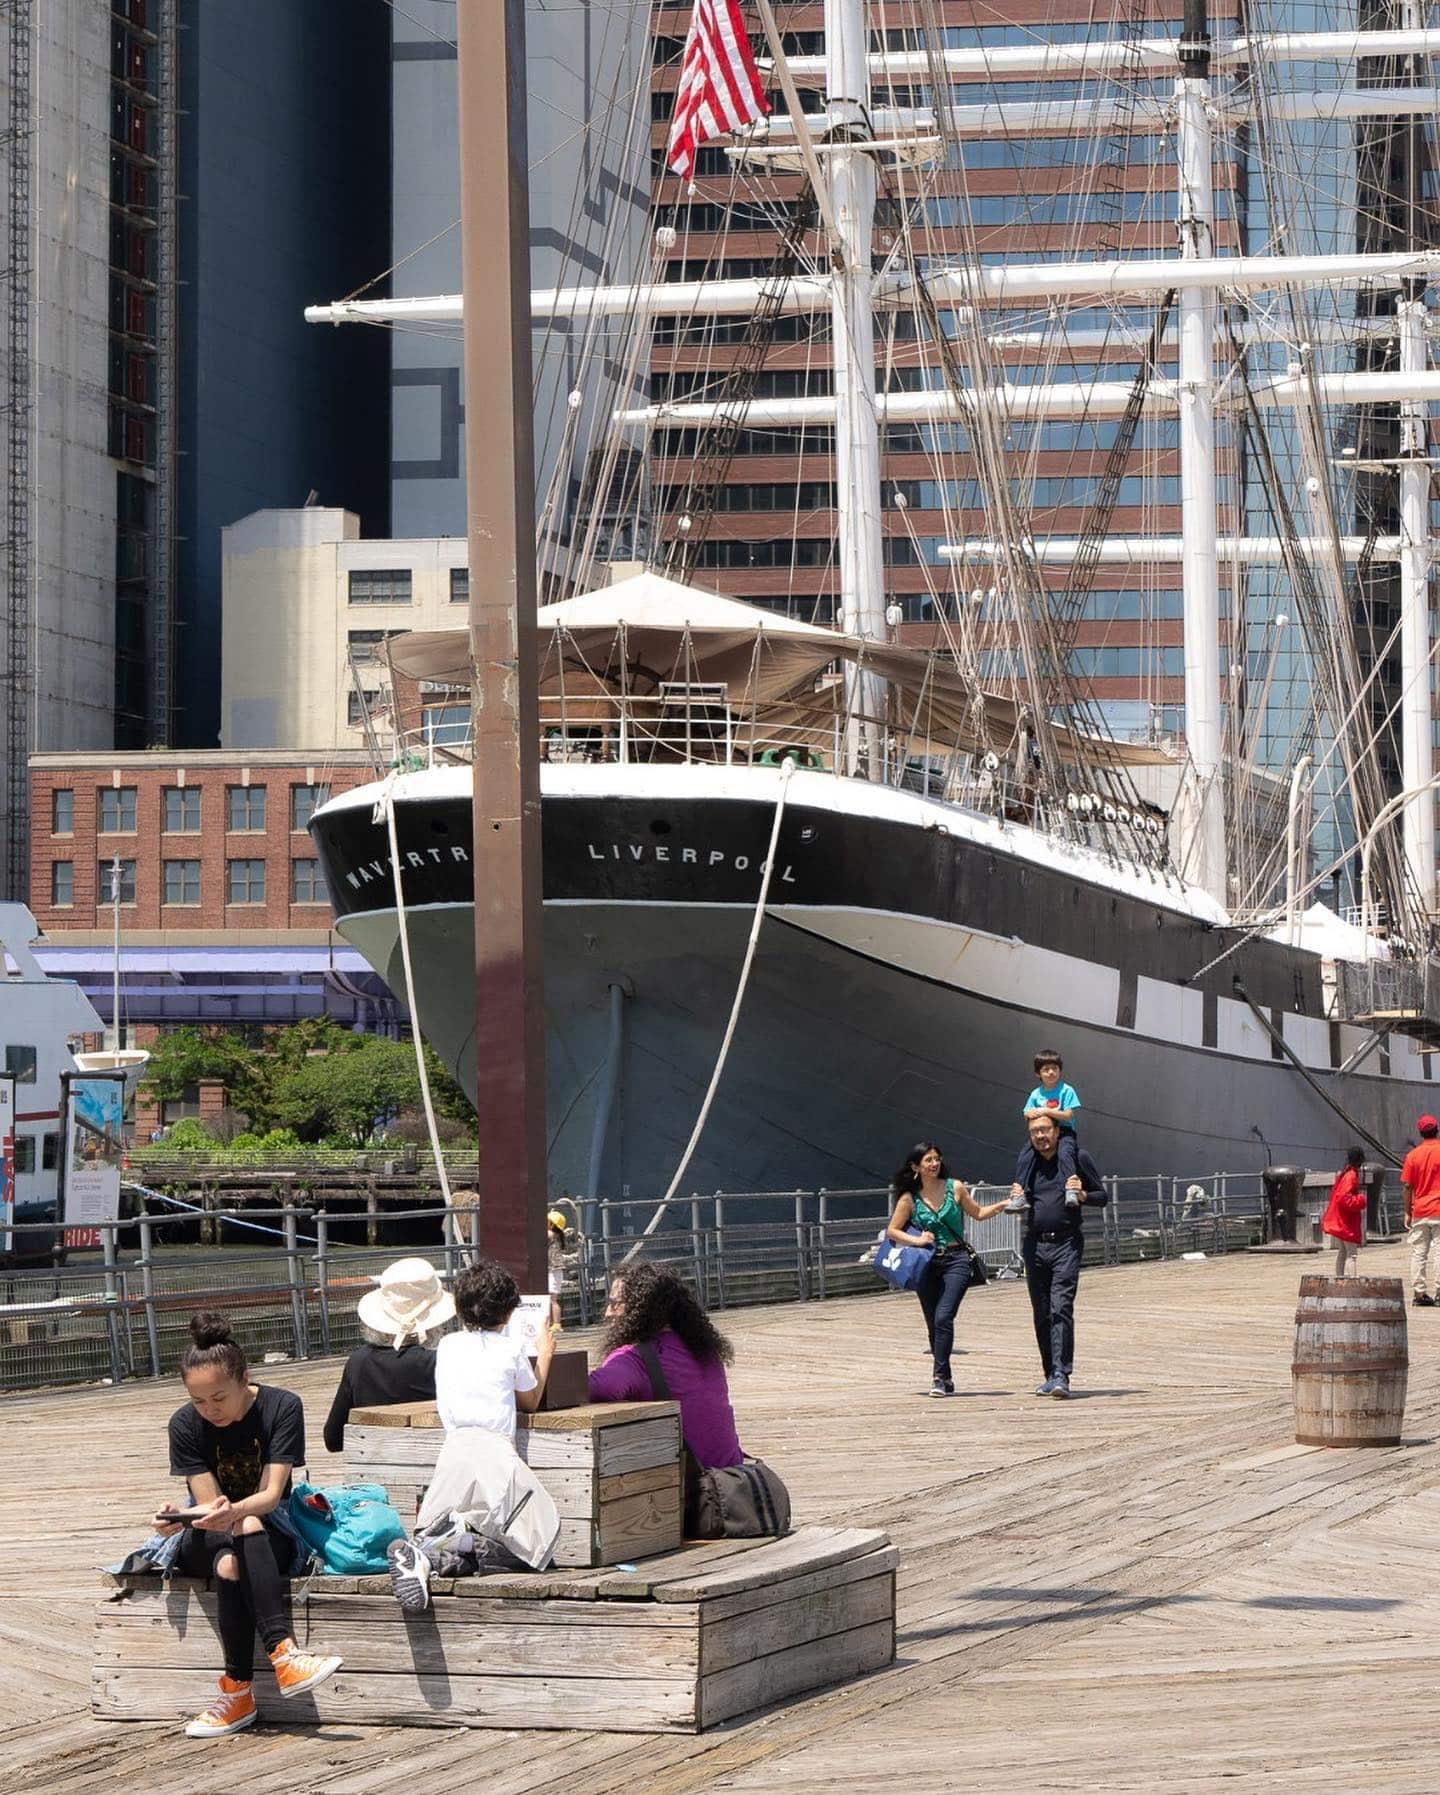 Historic ships. Exhibitions. Creative expression. Family fun for everyone. Experience it all at the @seaportmuseum. July events ↴ 7/15 ➤ City of Water Day 7/16 ➤ Launch & Learn Sail 7/19 ➤ Live reading w/ Claire Bellerjeau Last Saturday of every month ➤ Stationery workshops at Bowne & Co. Details ➤ link in bio #TheSeaport